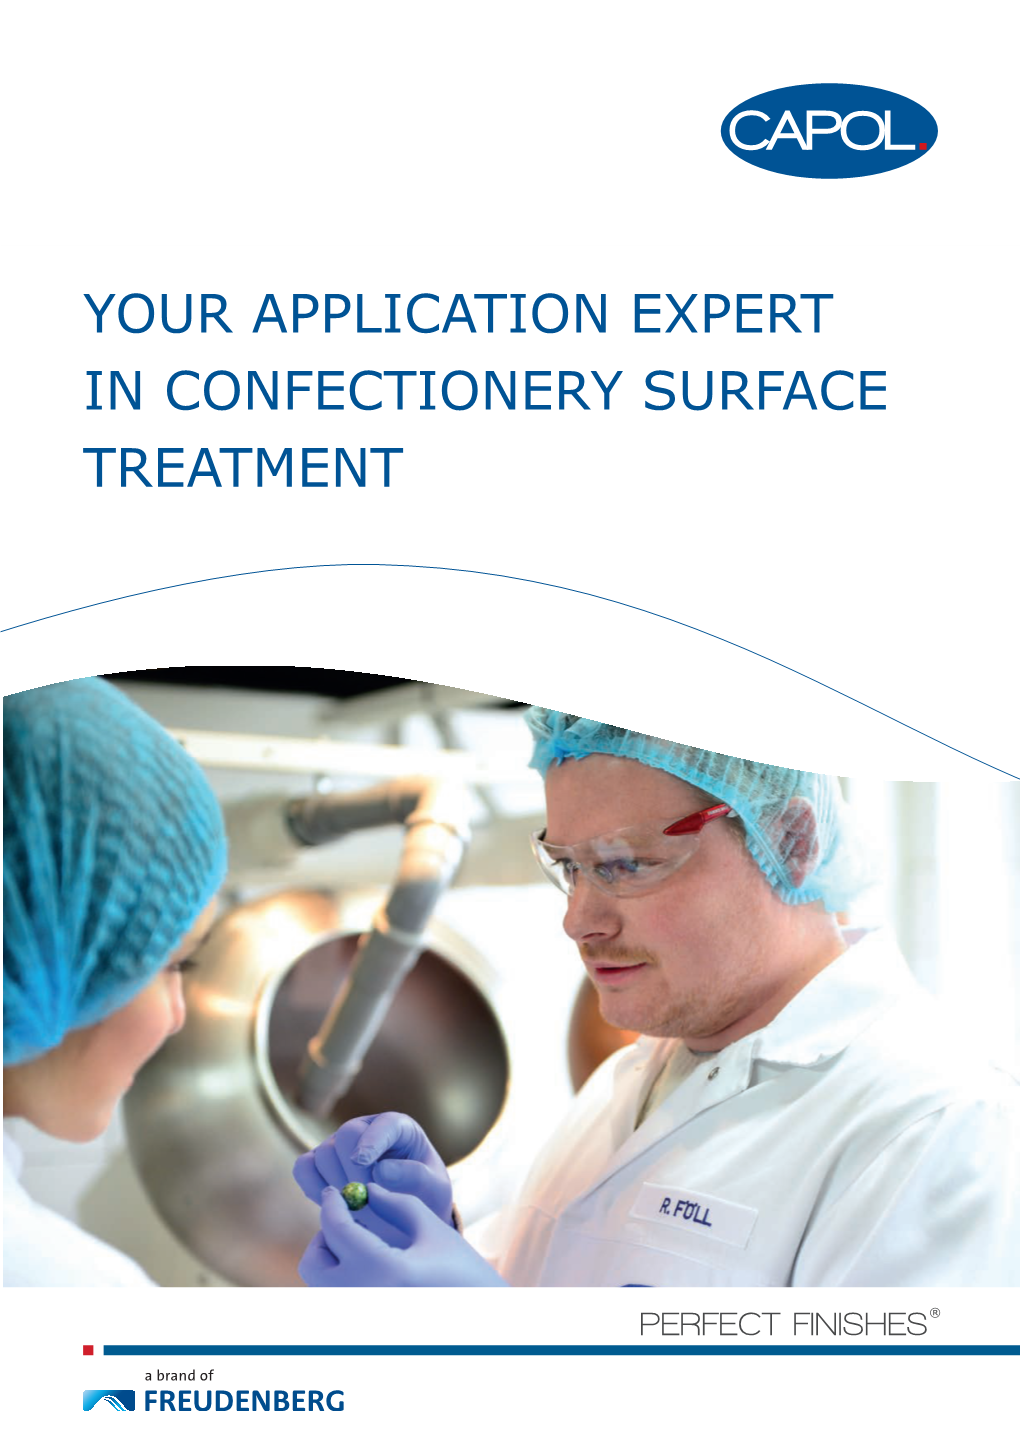 Your Application Expert in Confectionery Surface Treatment